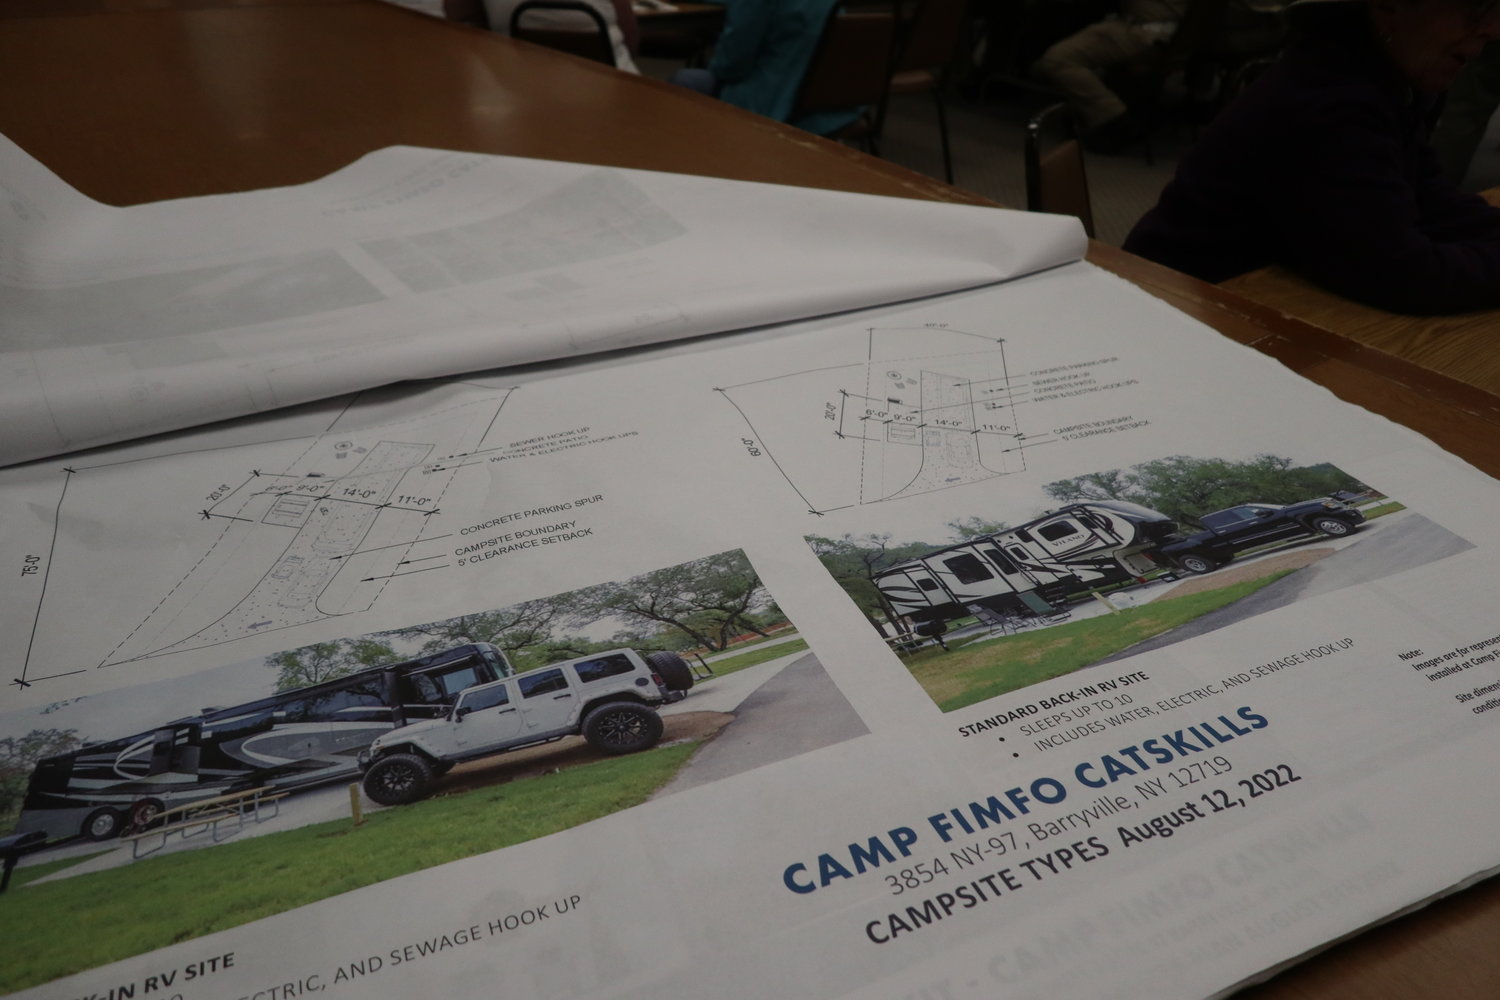 This large rendering of RV pull-in campsites does not reflect the rocky and hilly terrain of the former Kittatinny Campgrounds. It does show a lot of impervious surfaces.